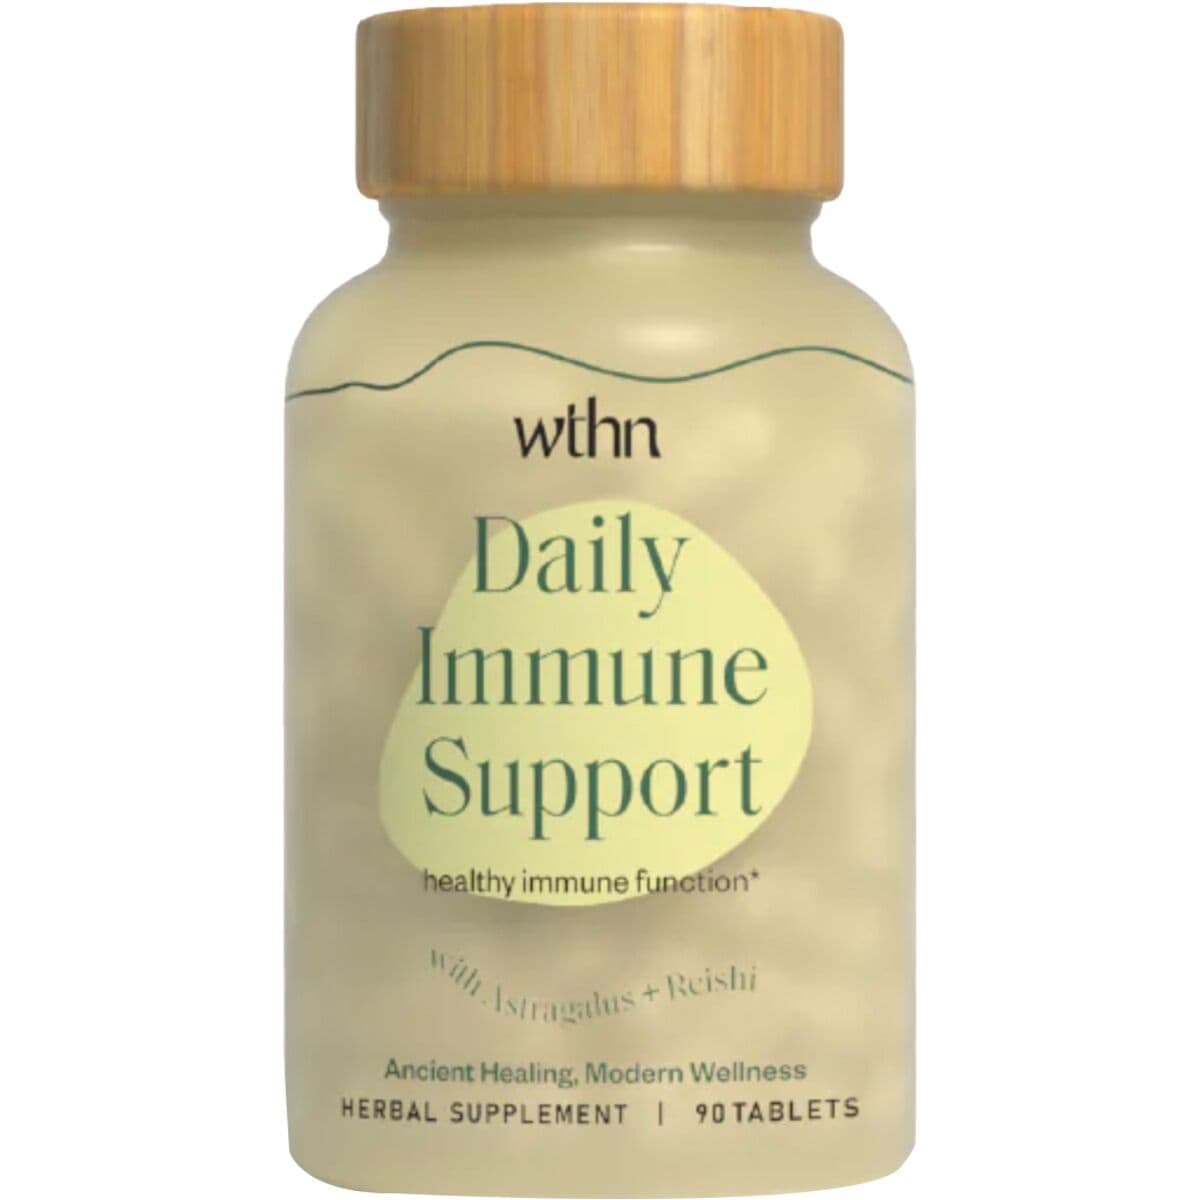 WTHN Daily Immune Support